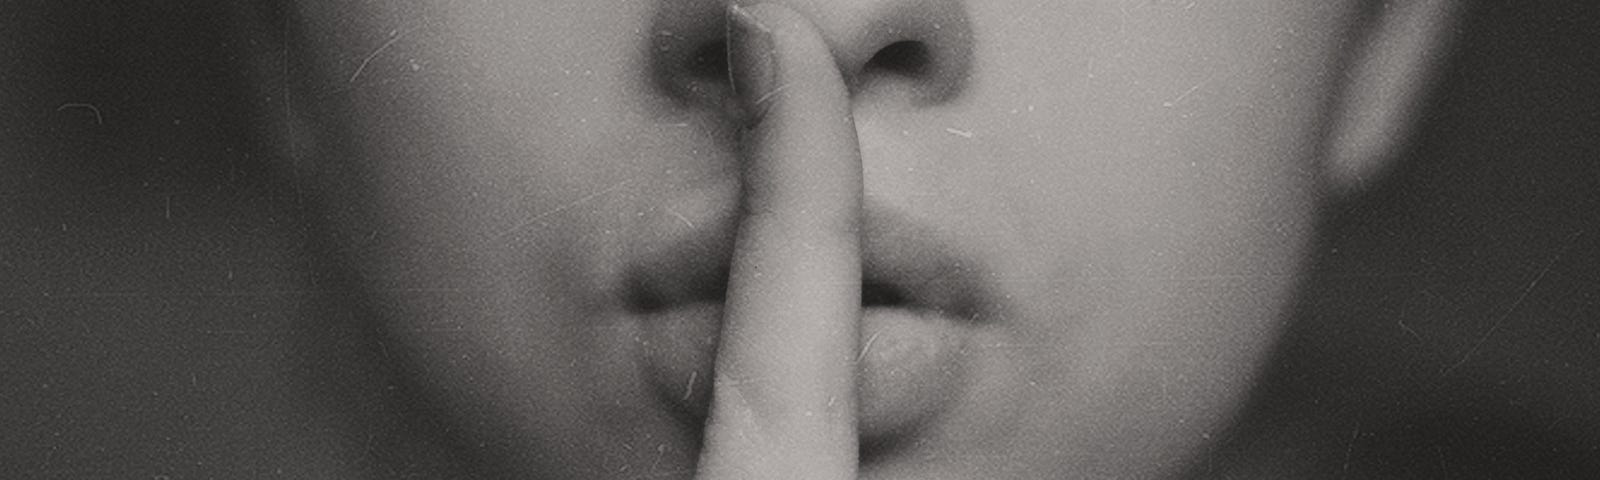 Image of a woman with a finger over her mouth making the “quiet” gesture.